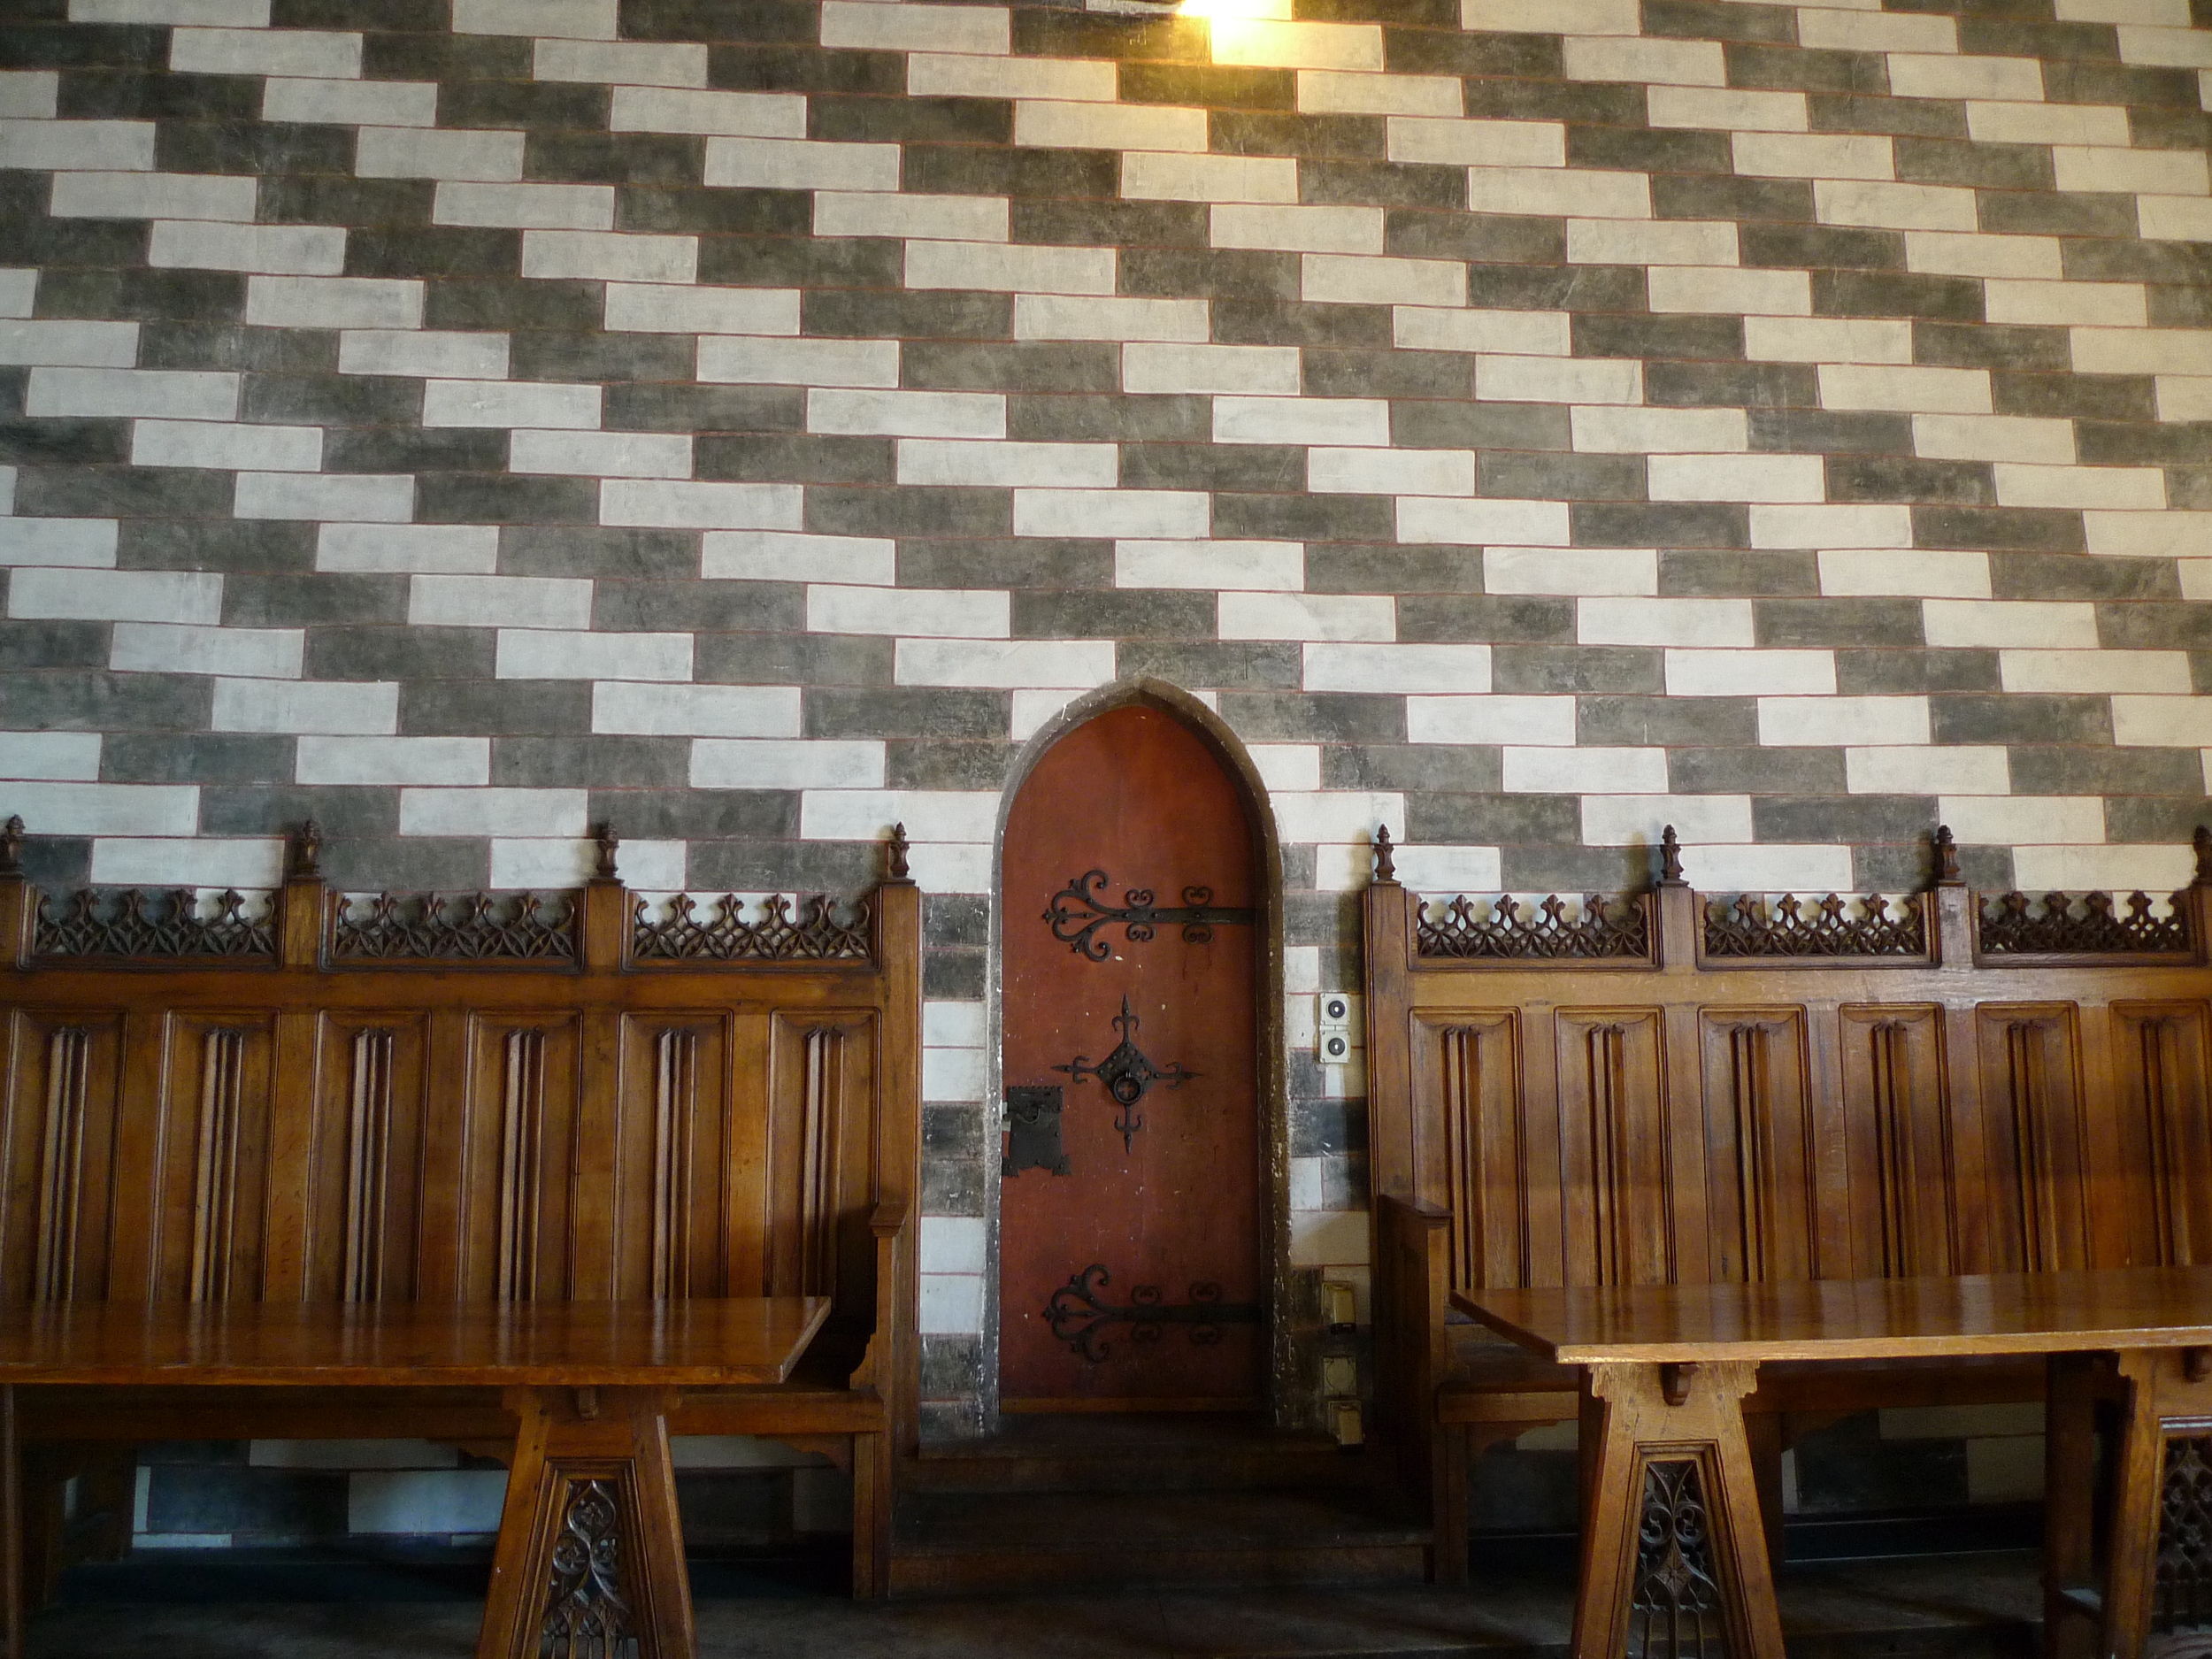  I loved the fact they used to paint their walls in different patterns to substitute wallpaper 